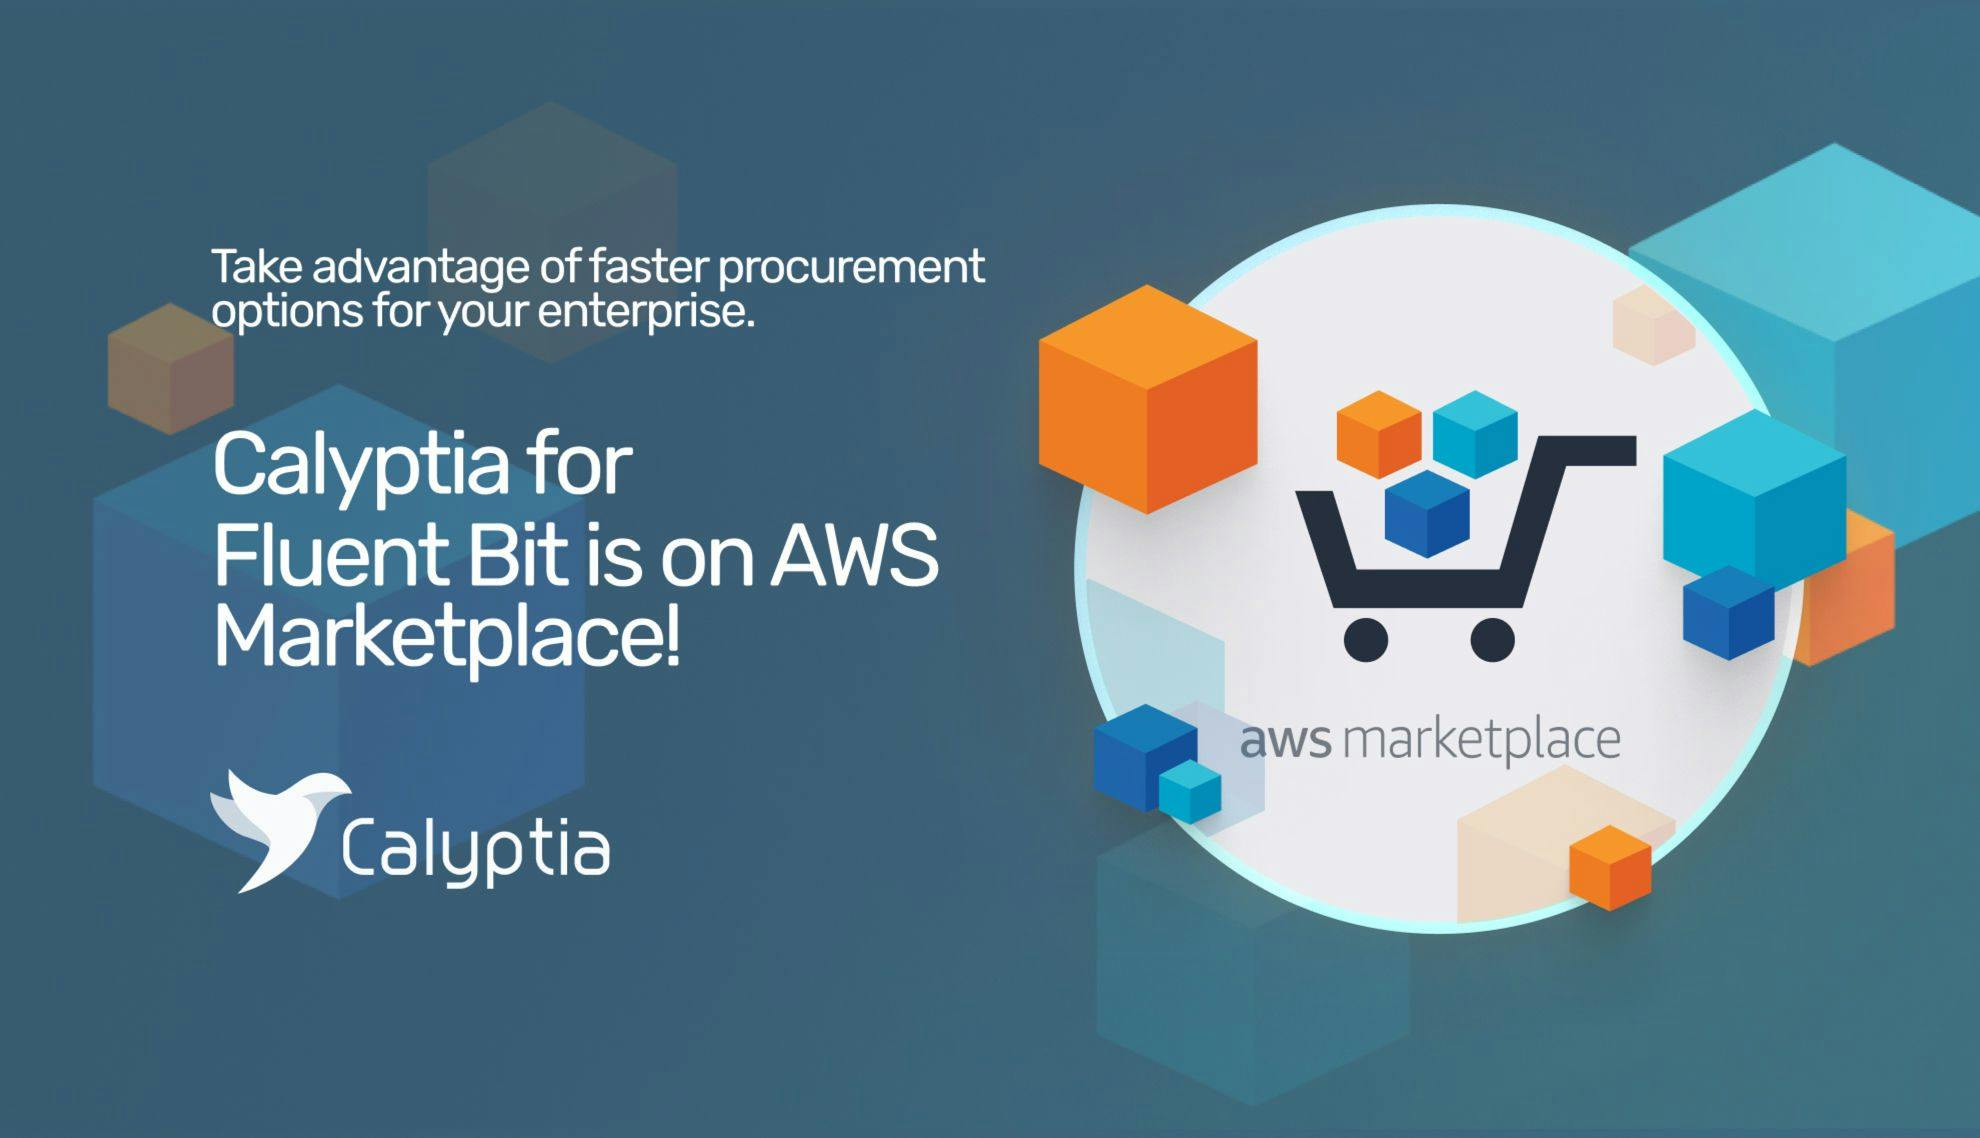 Calyptia for Fluent Bit is on AWS Marketplace